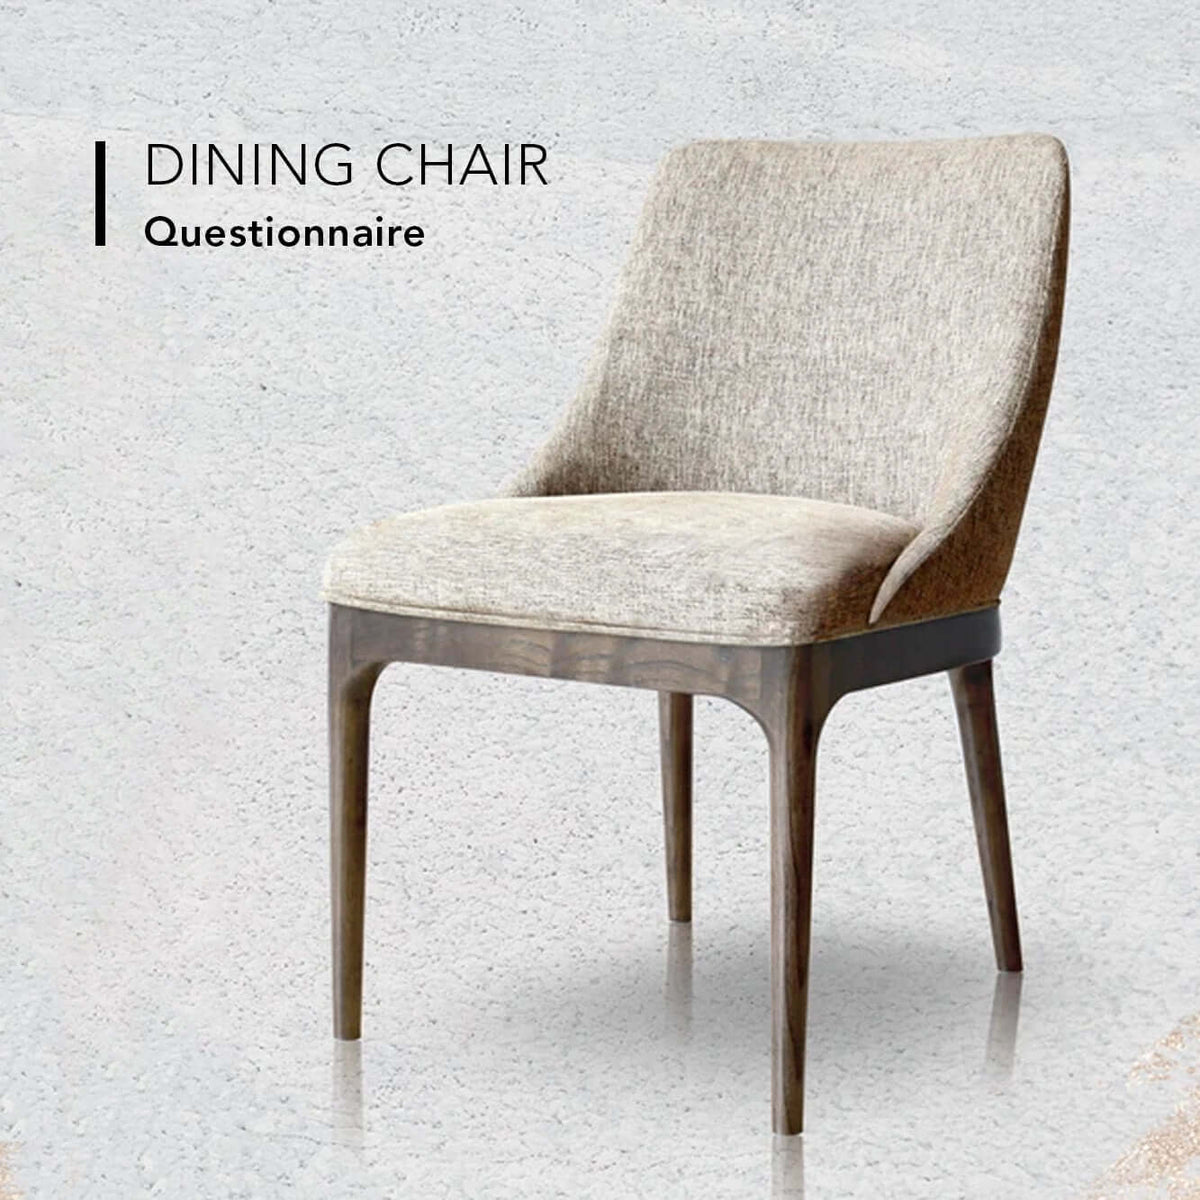 Dining Chair Questionnaire